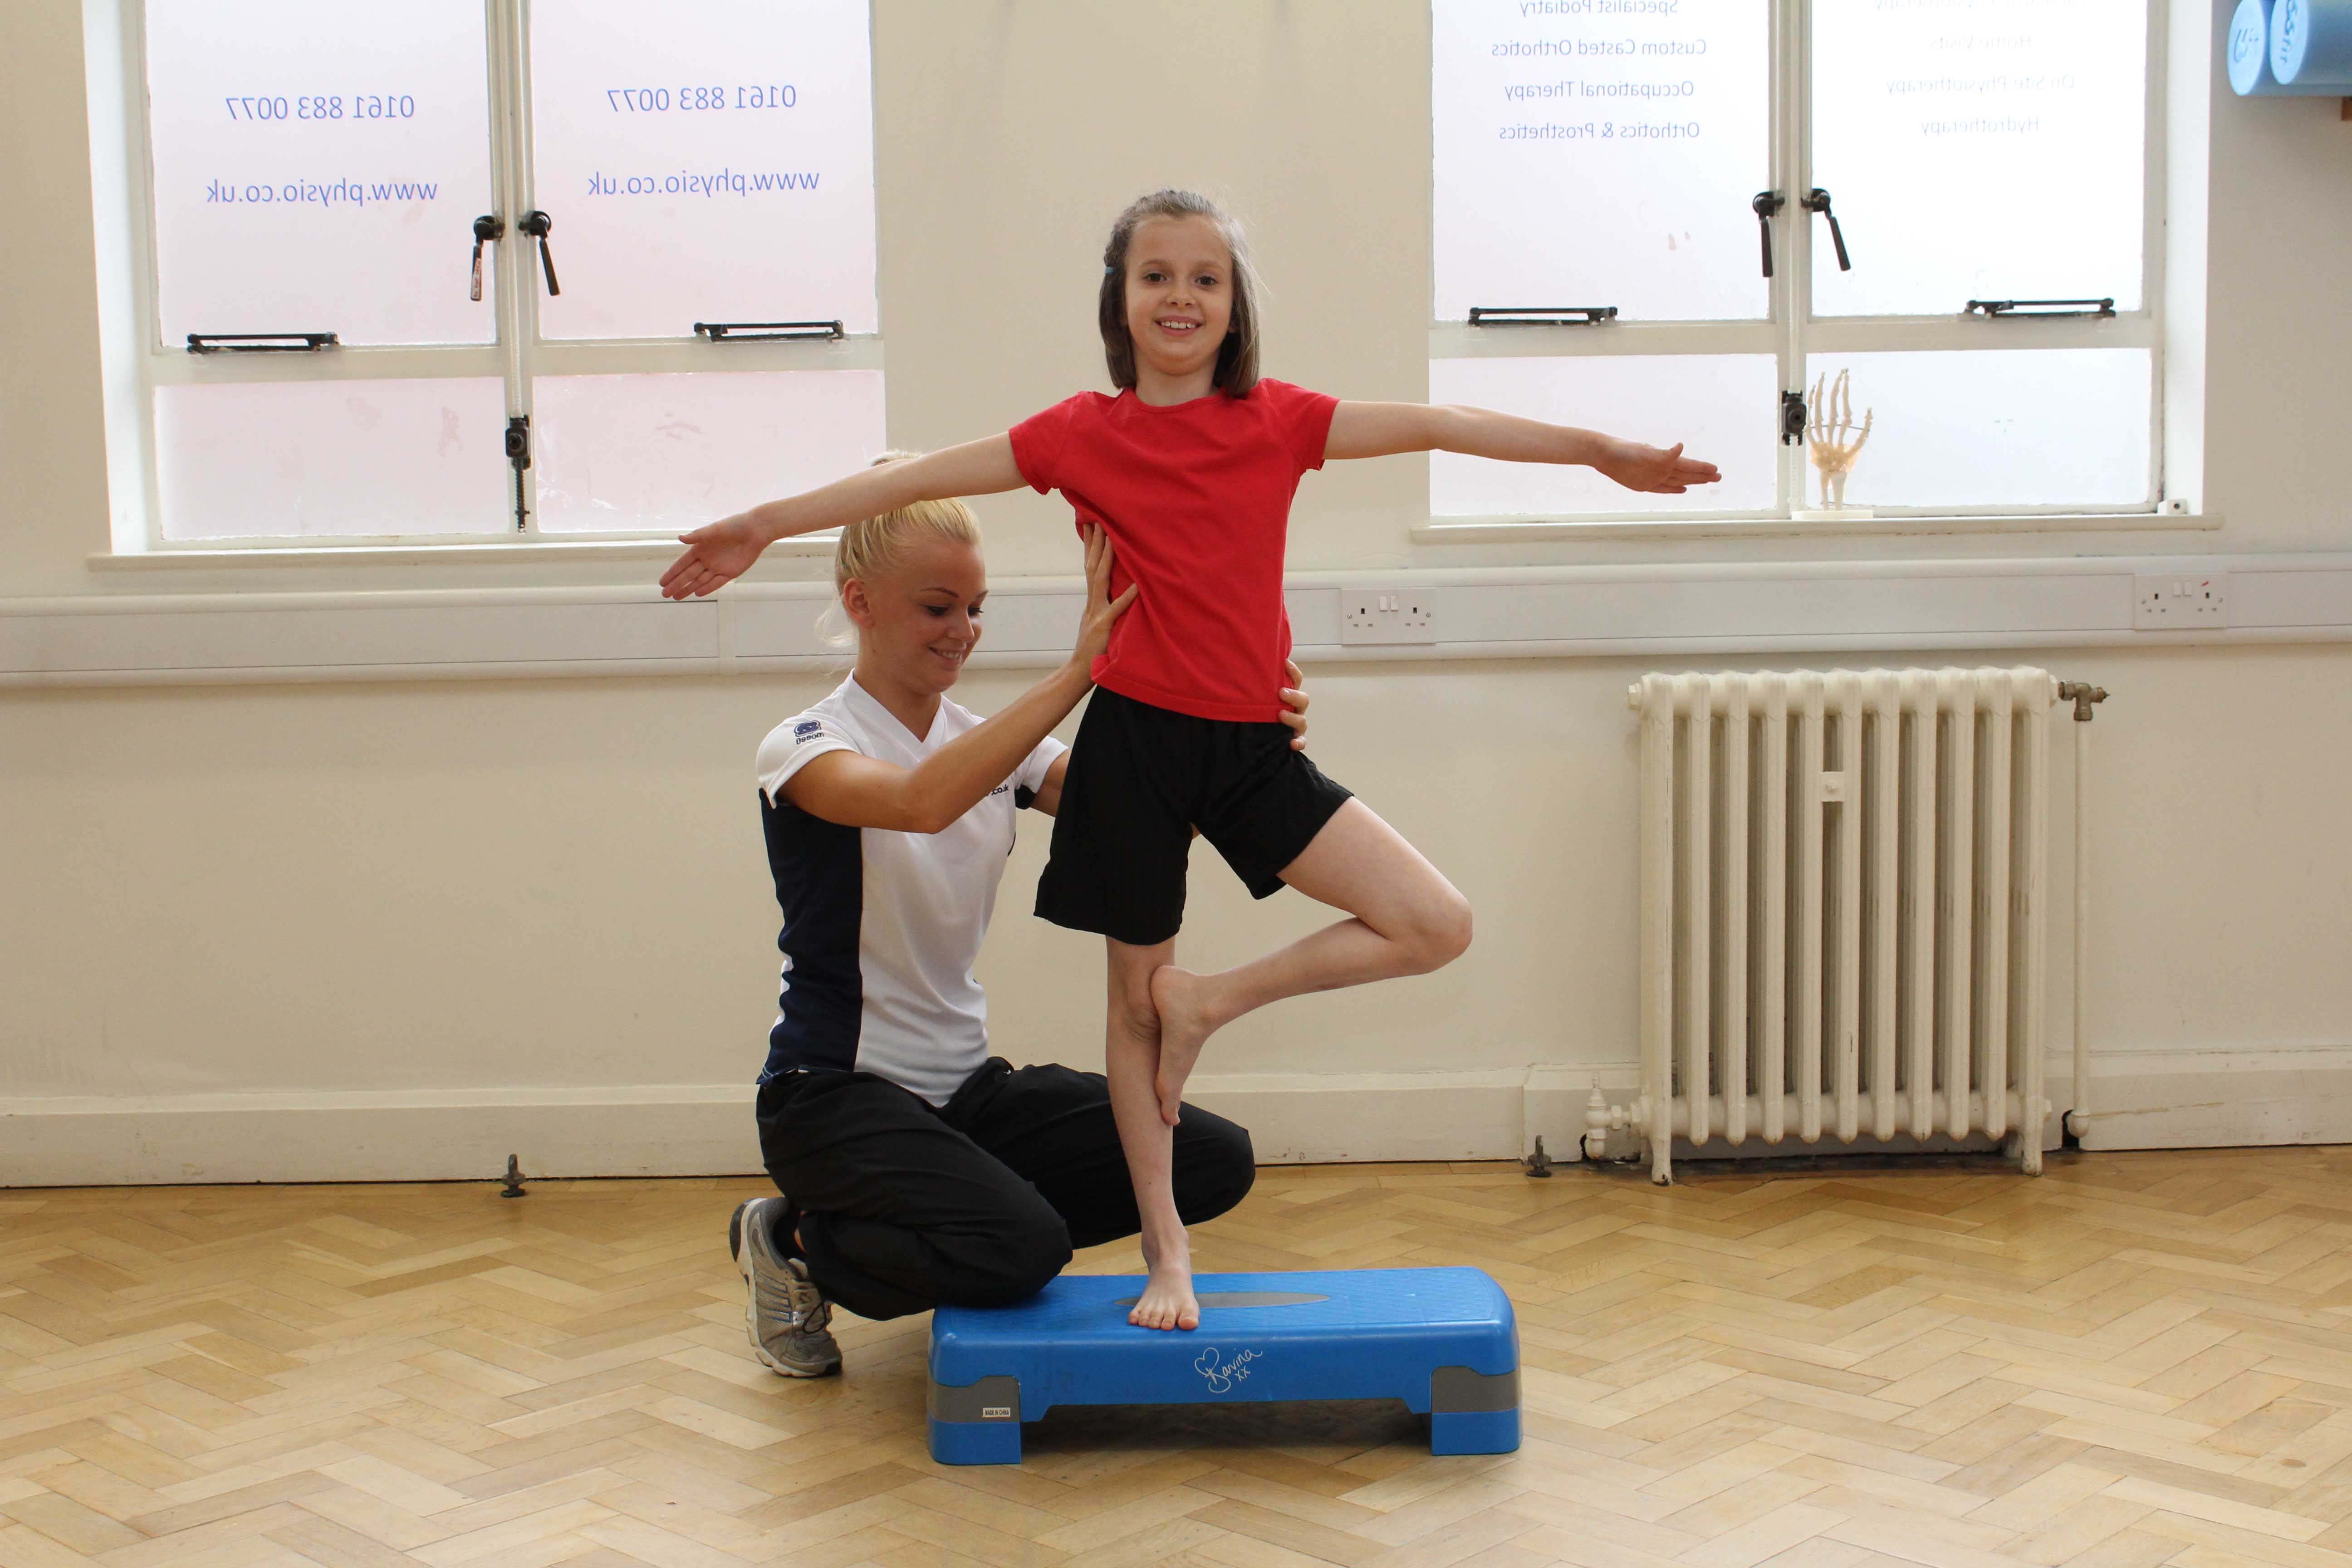 Stability and strengthening exercises assisted by physiotherapist